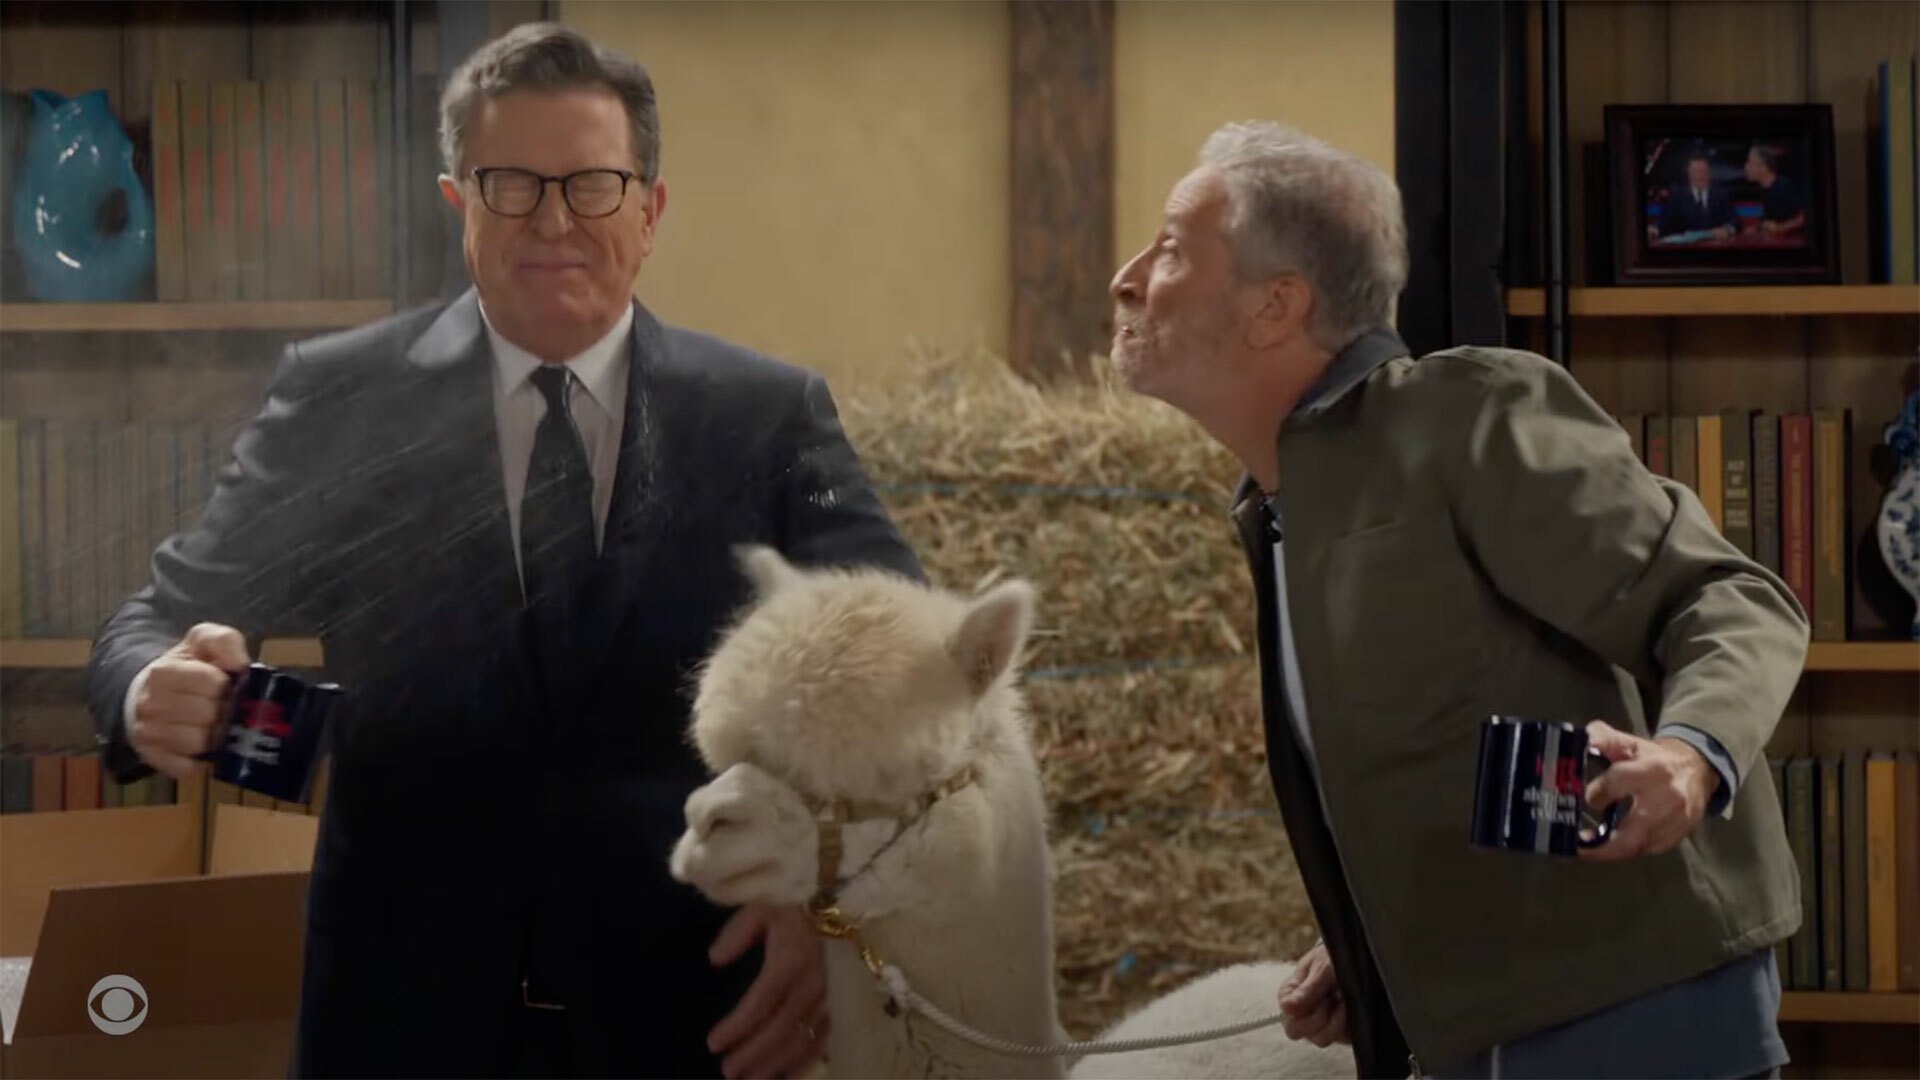 A man spits water over a man in a suit, while an alpaca stands between them.